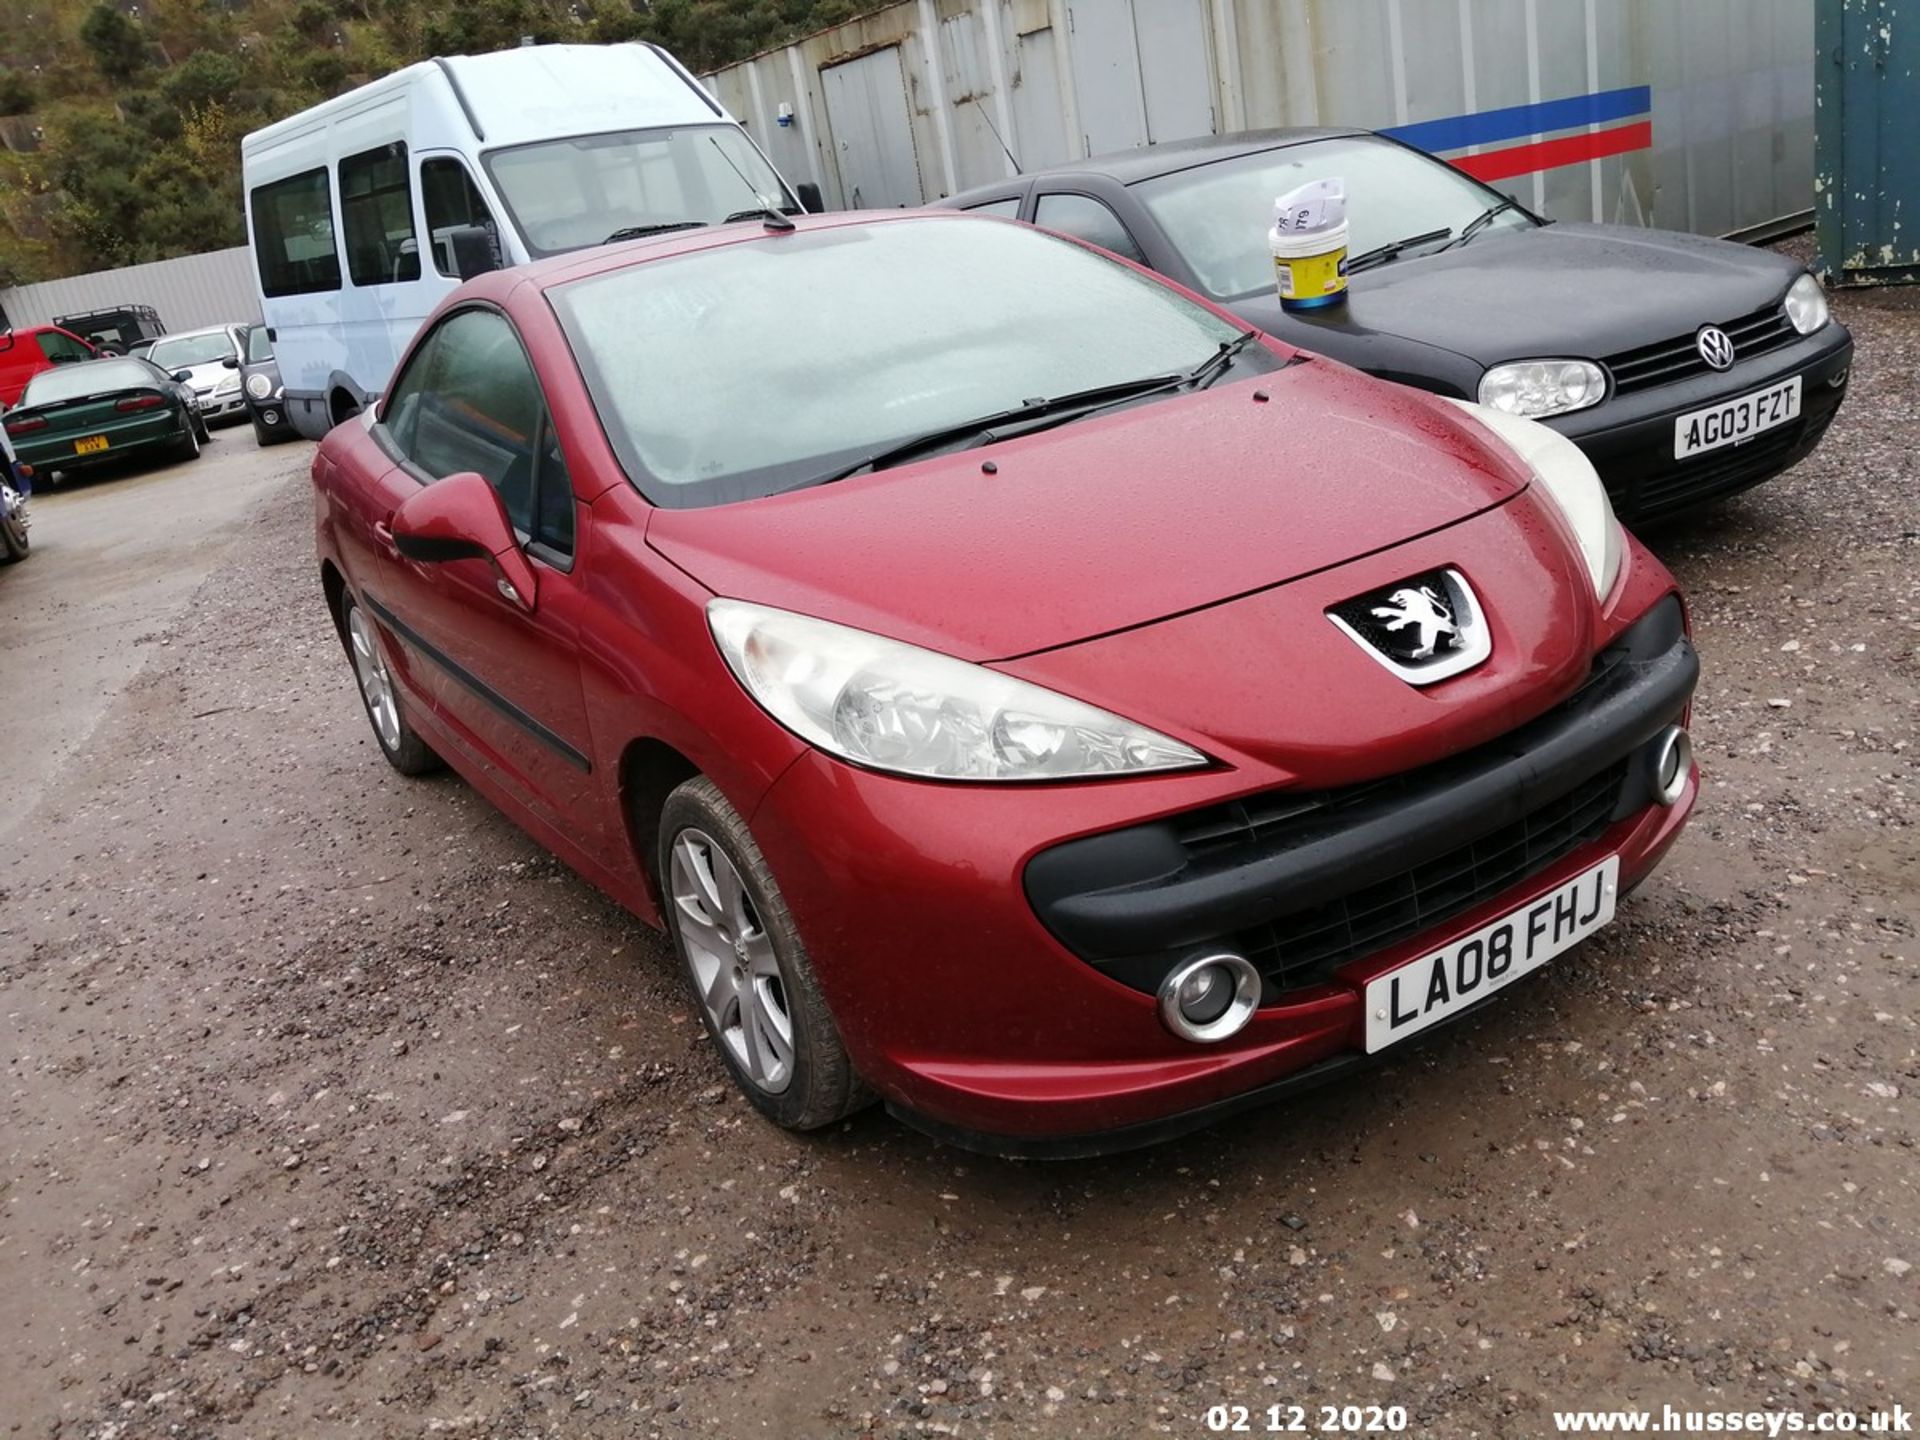 08/08 PEUGEOT 207 SPORT CC - 1598cc 2dr Convertible (Red, 93k) - Image 5 of 9